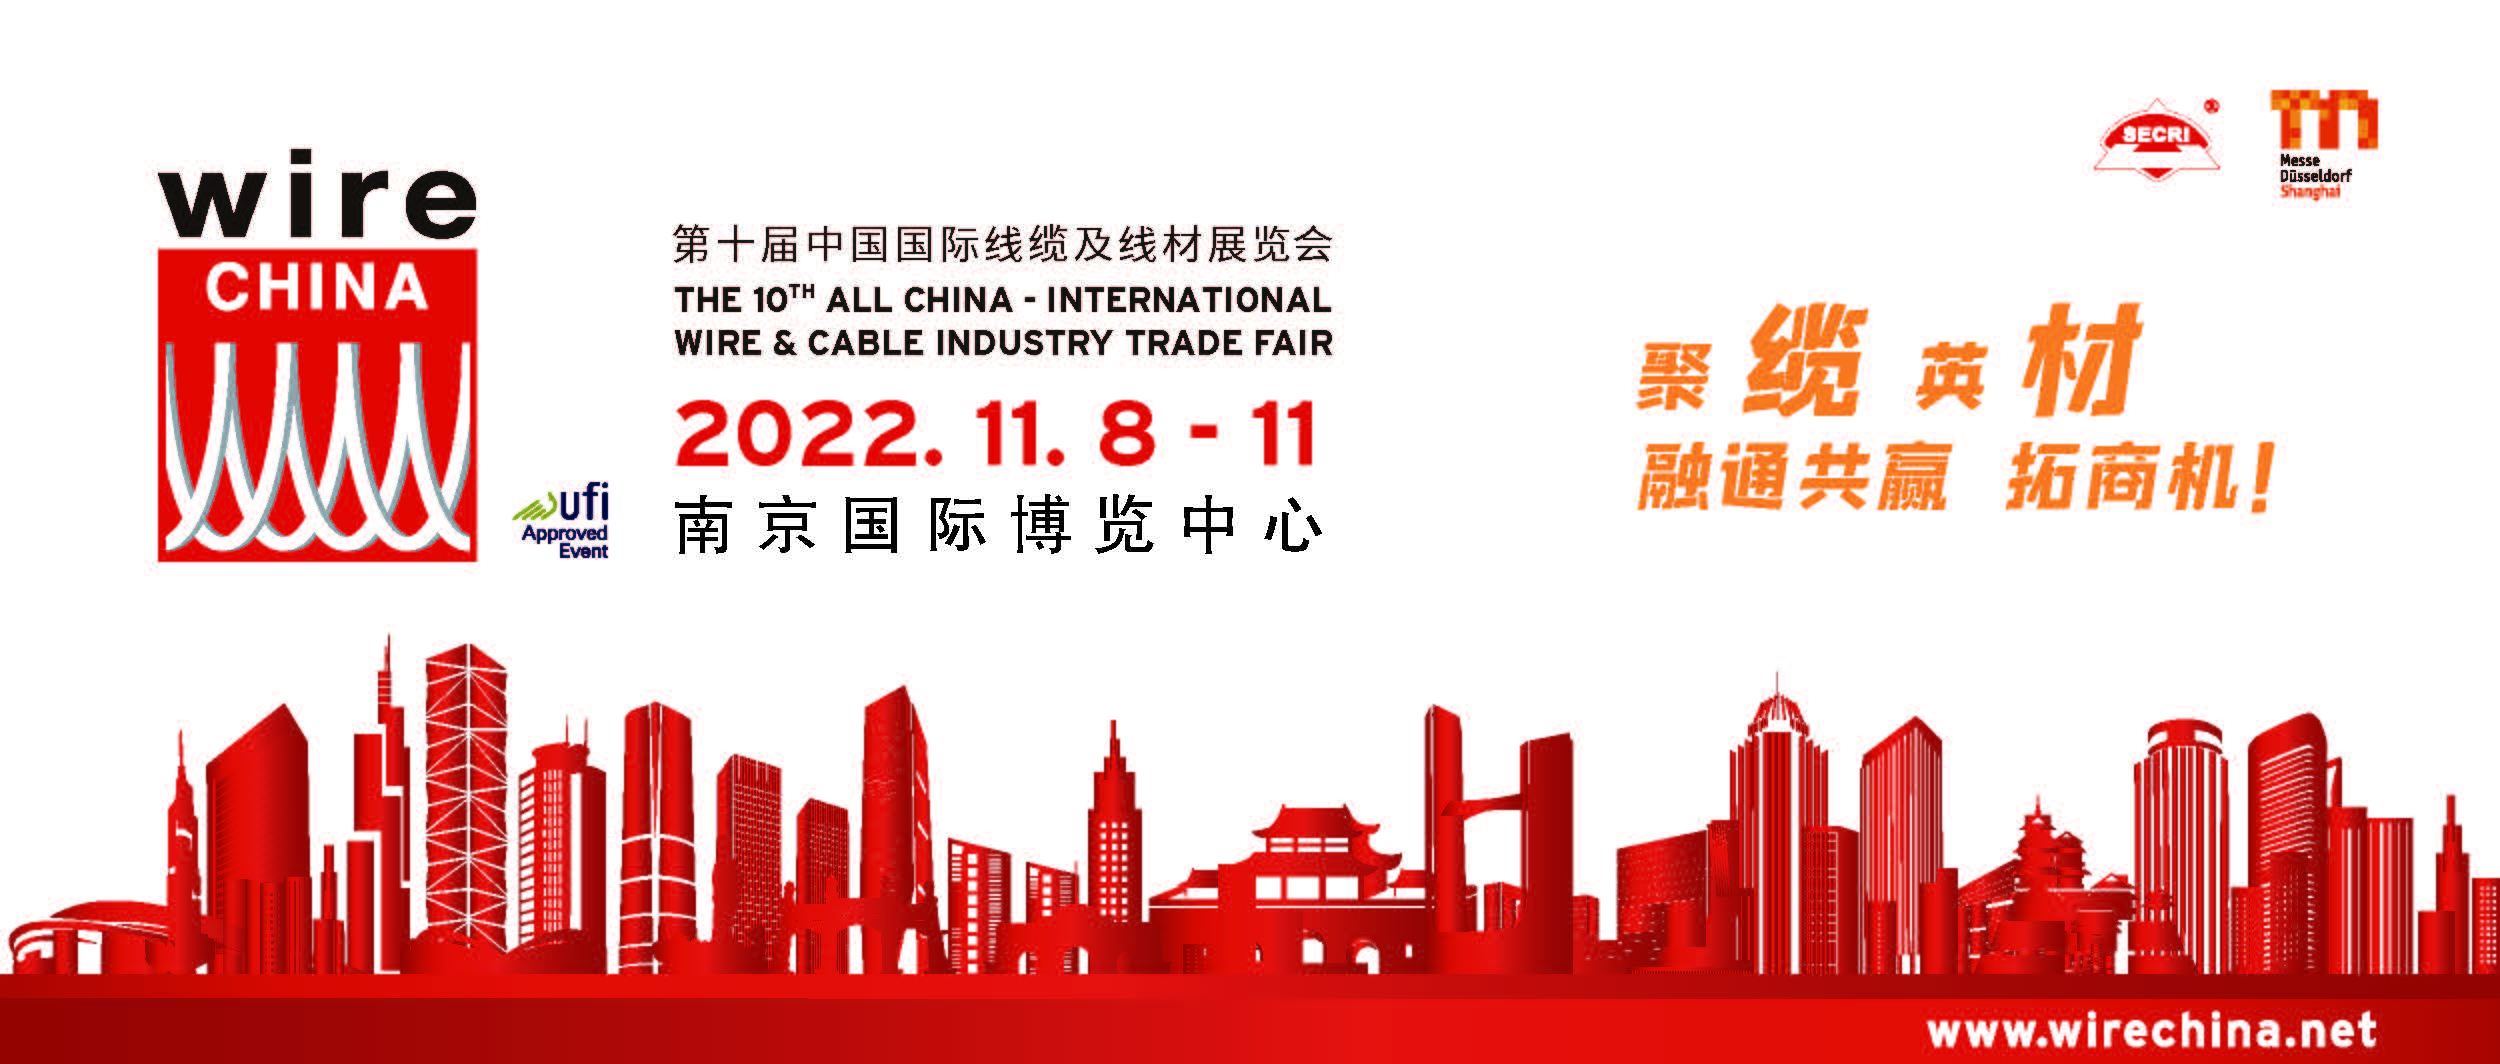 New Venue and Dates for wire China 2022 confirmed:  Nanjing, November 2022